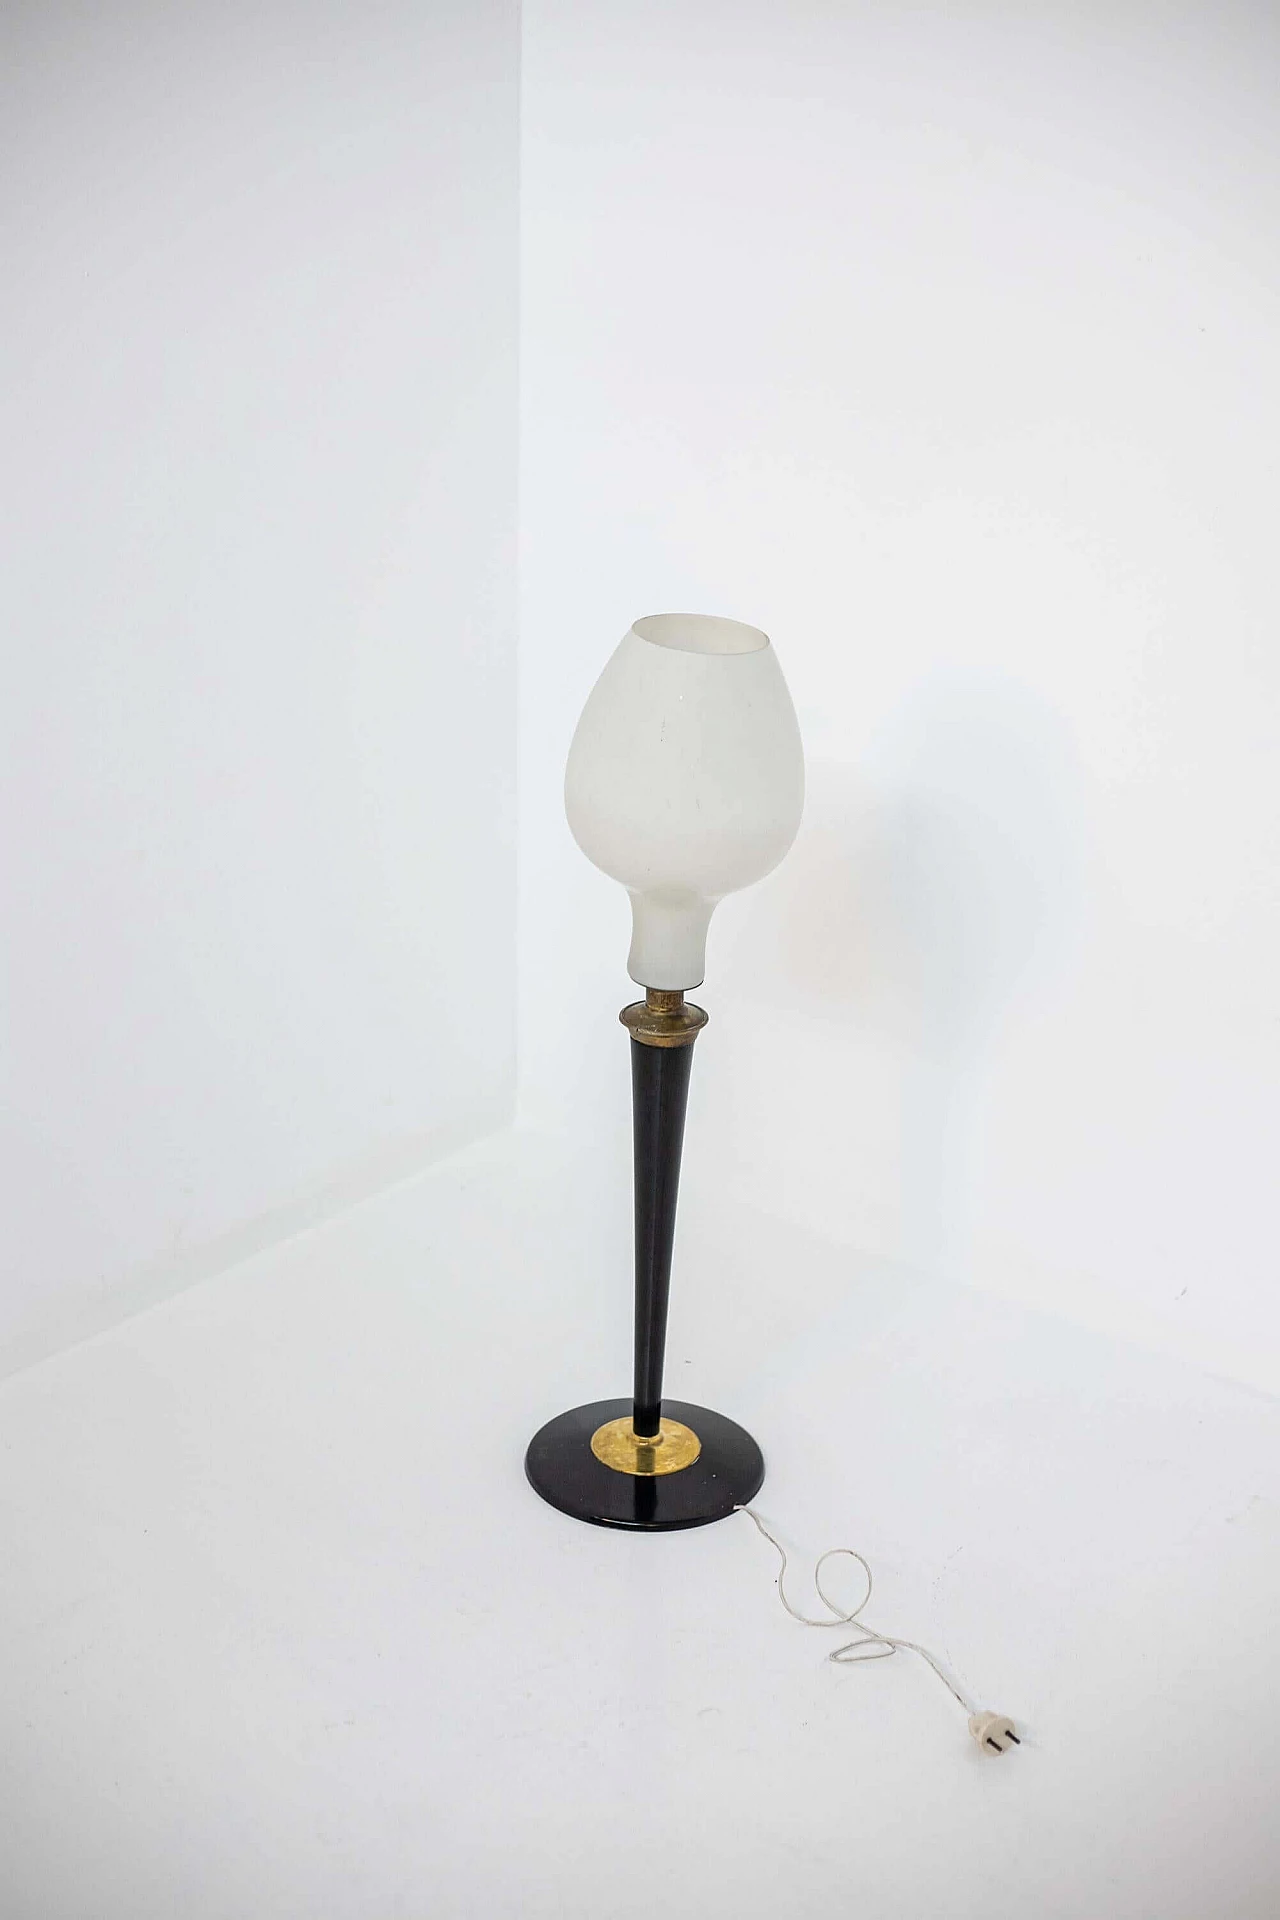 Opal glass table lamp with wood and brass frame, 1950s 1400582